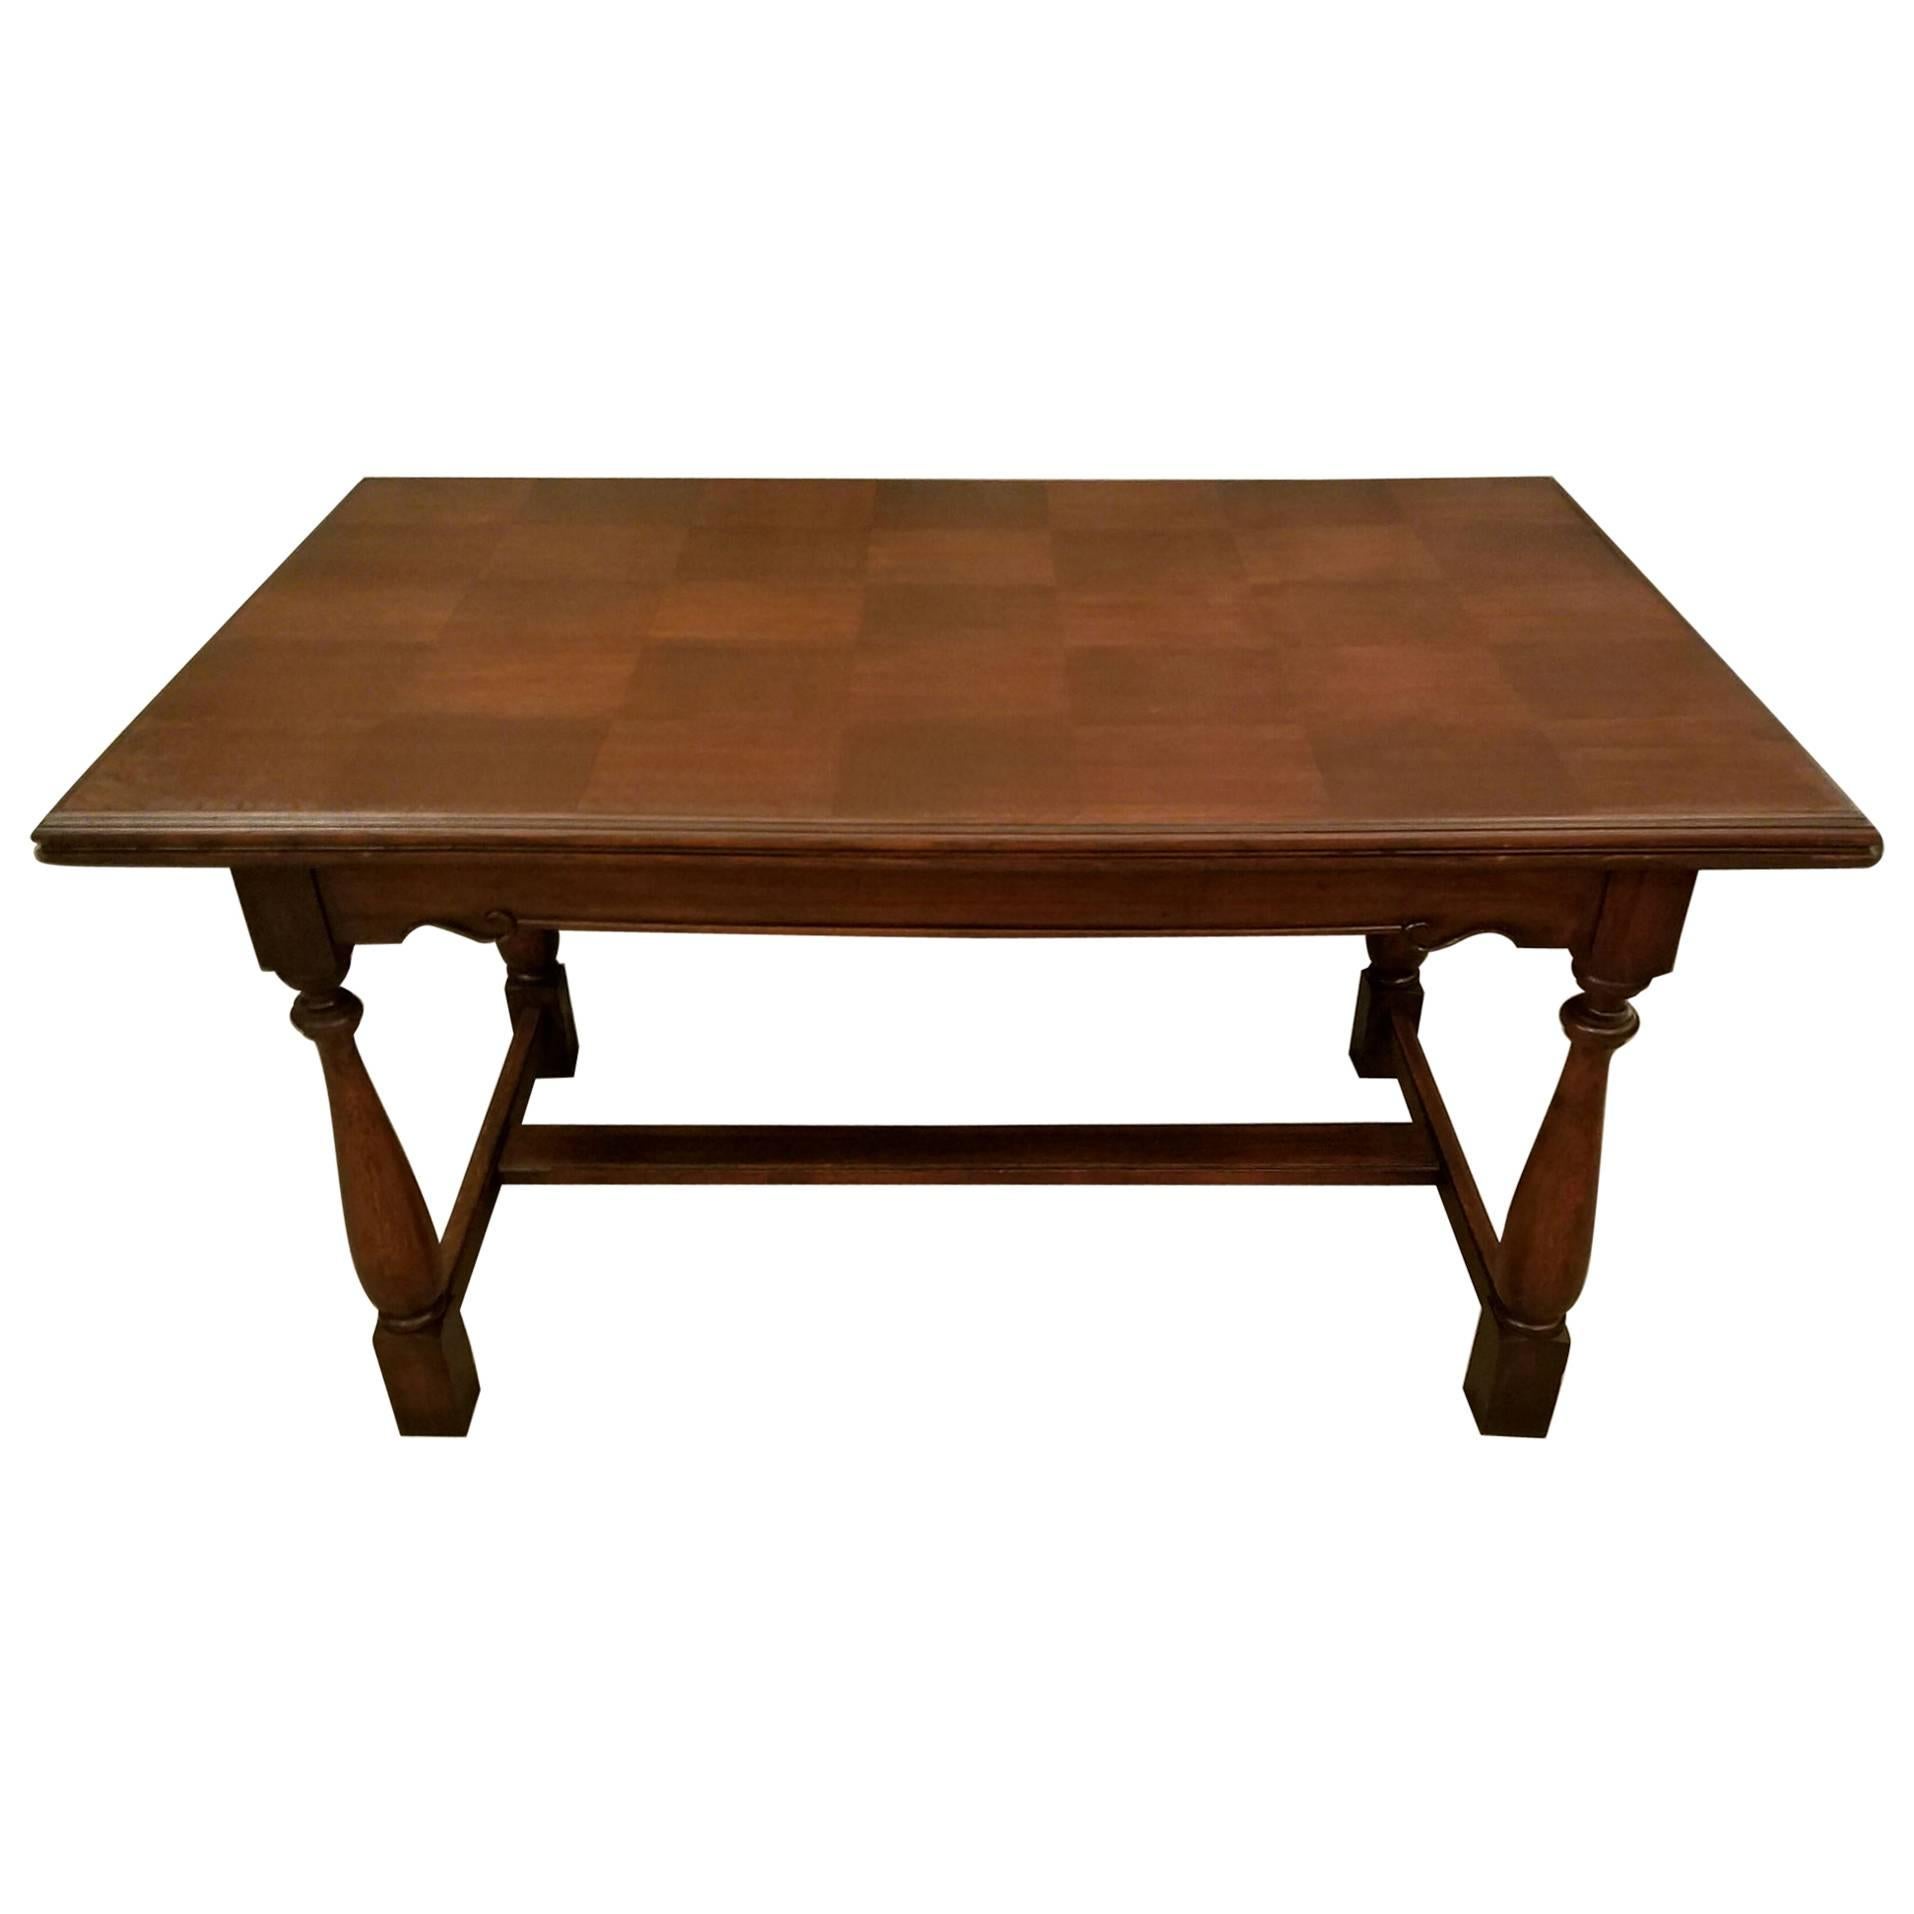 Antique Country French Carved Oak Refectory Dining Table with Parquetry Top For Sale